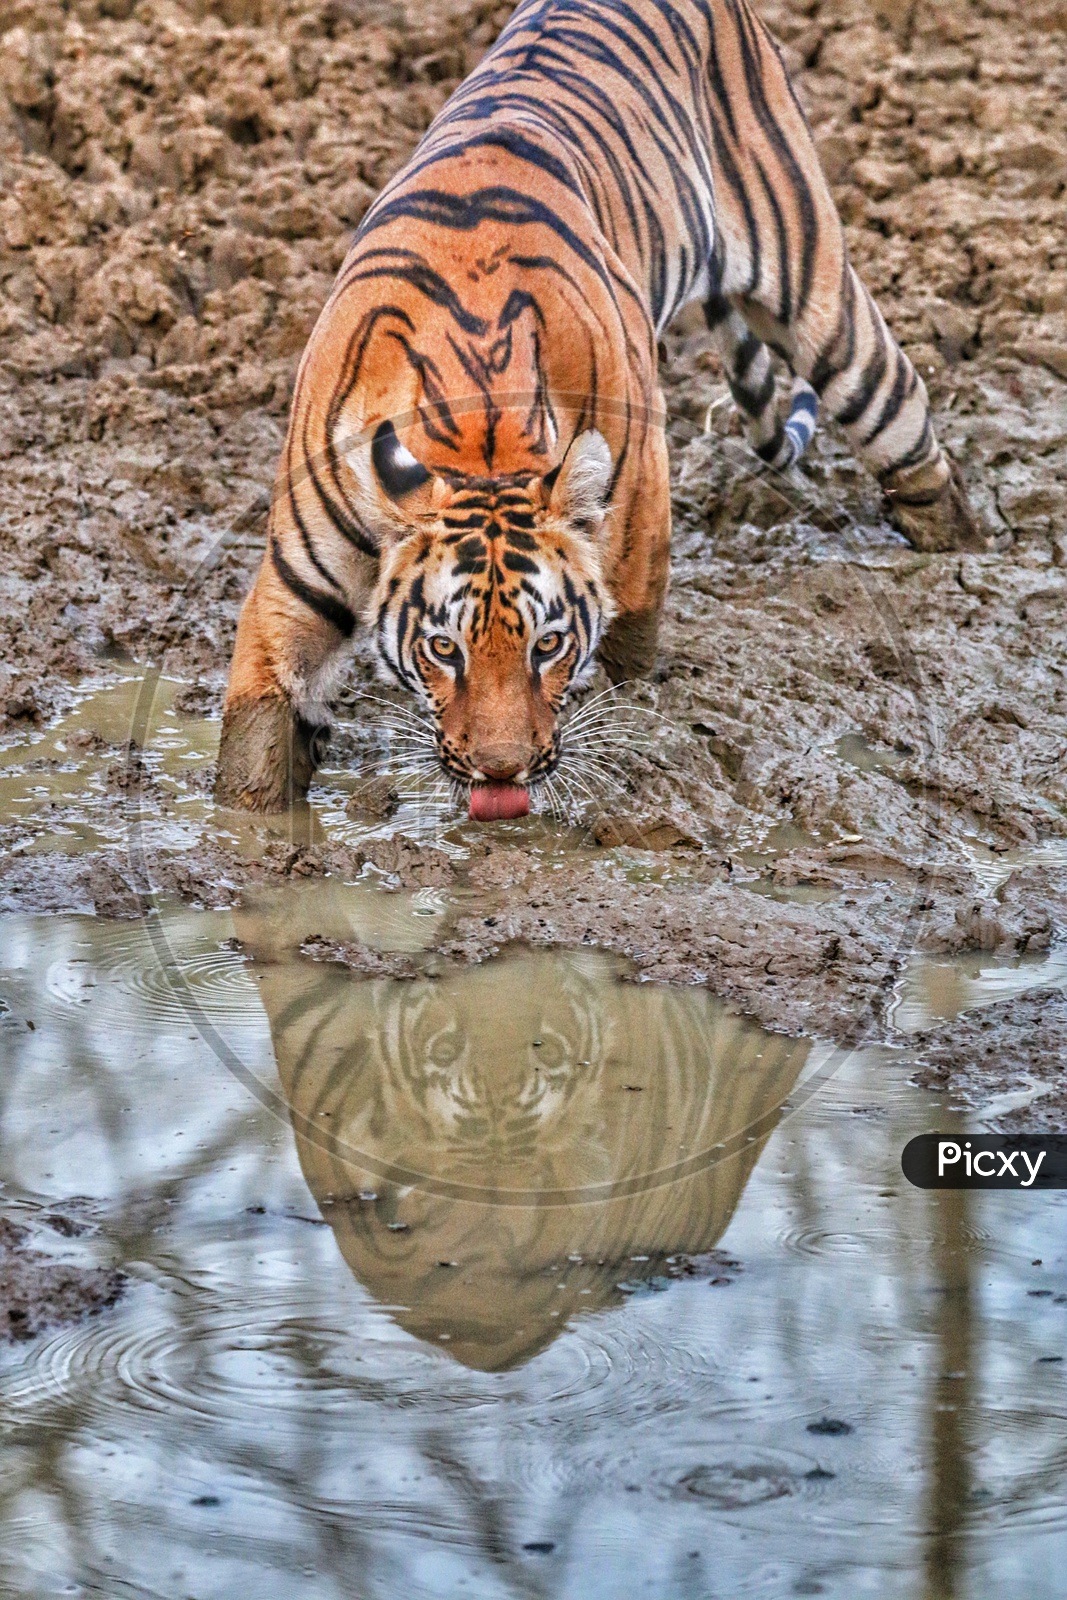 REFLECTION, EYE OF THE TIGER